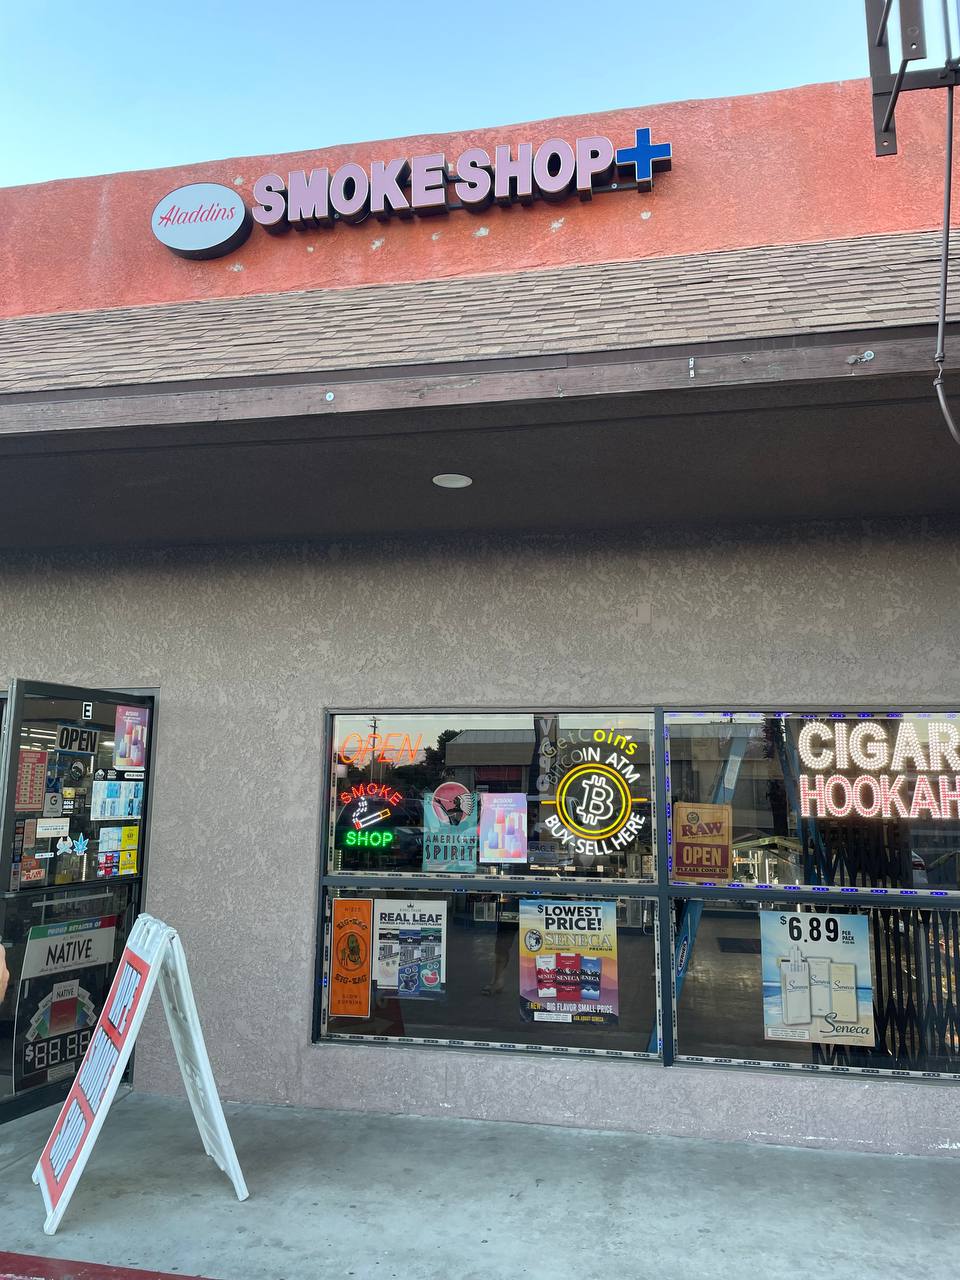 Getcoins - Bitcoin ATM - Inside of Aladdin's Smoke Shop in Cathedral City, California